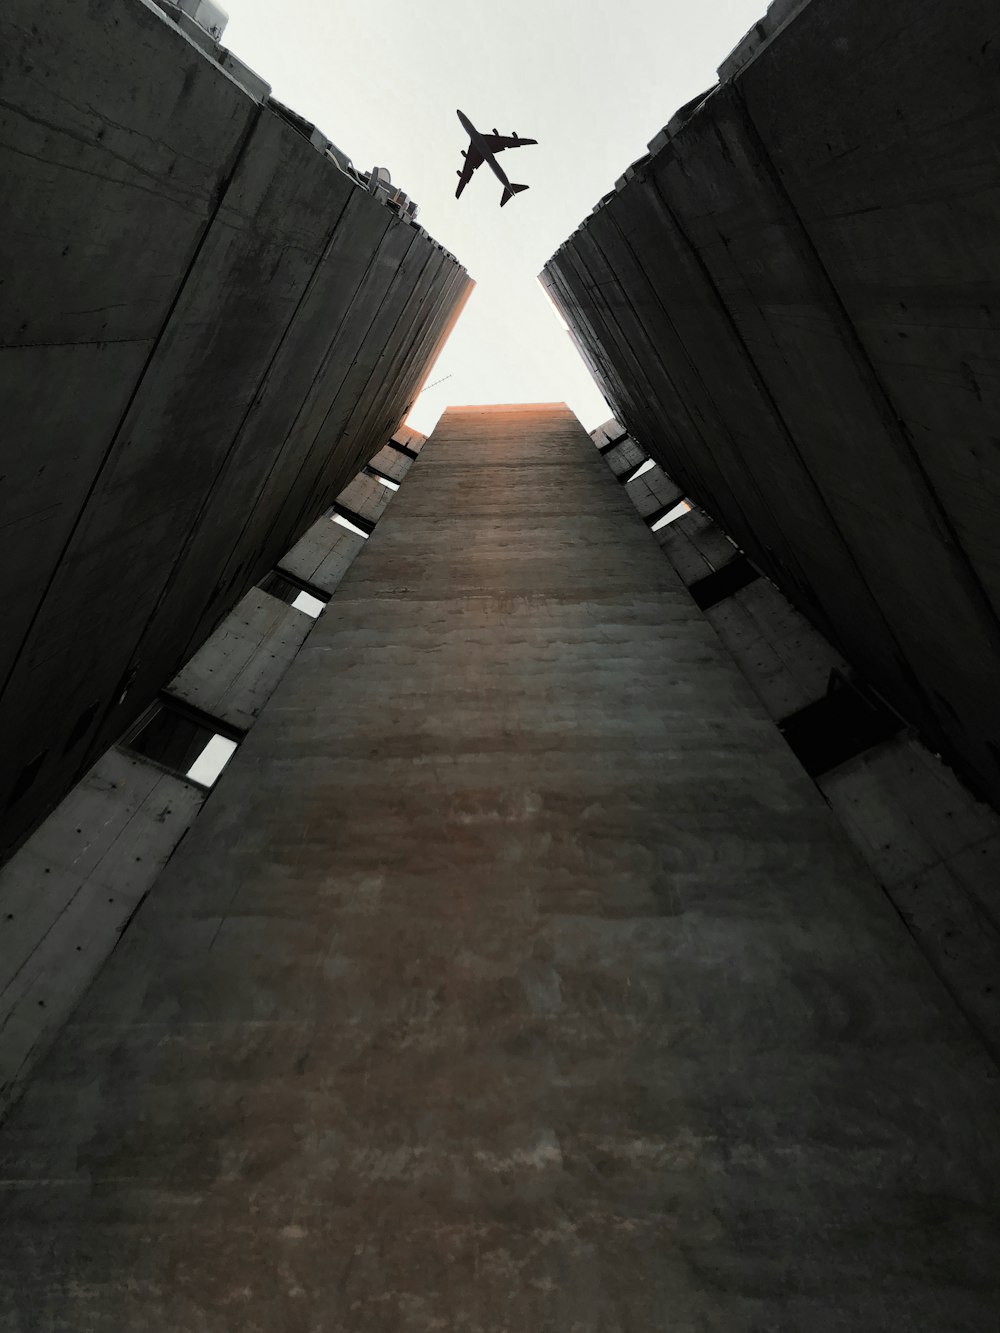 an airplane is flying over a concrete structure